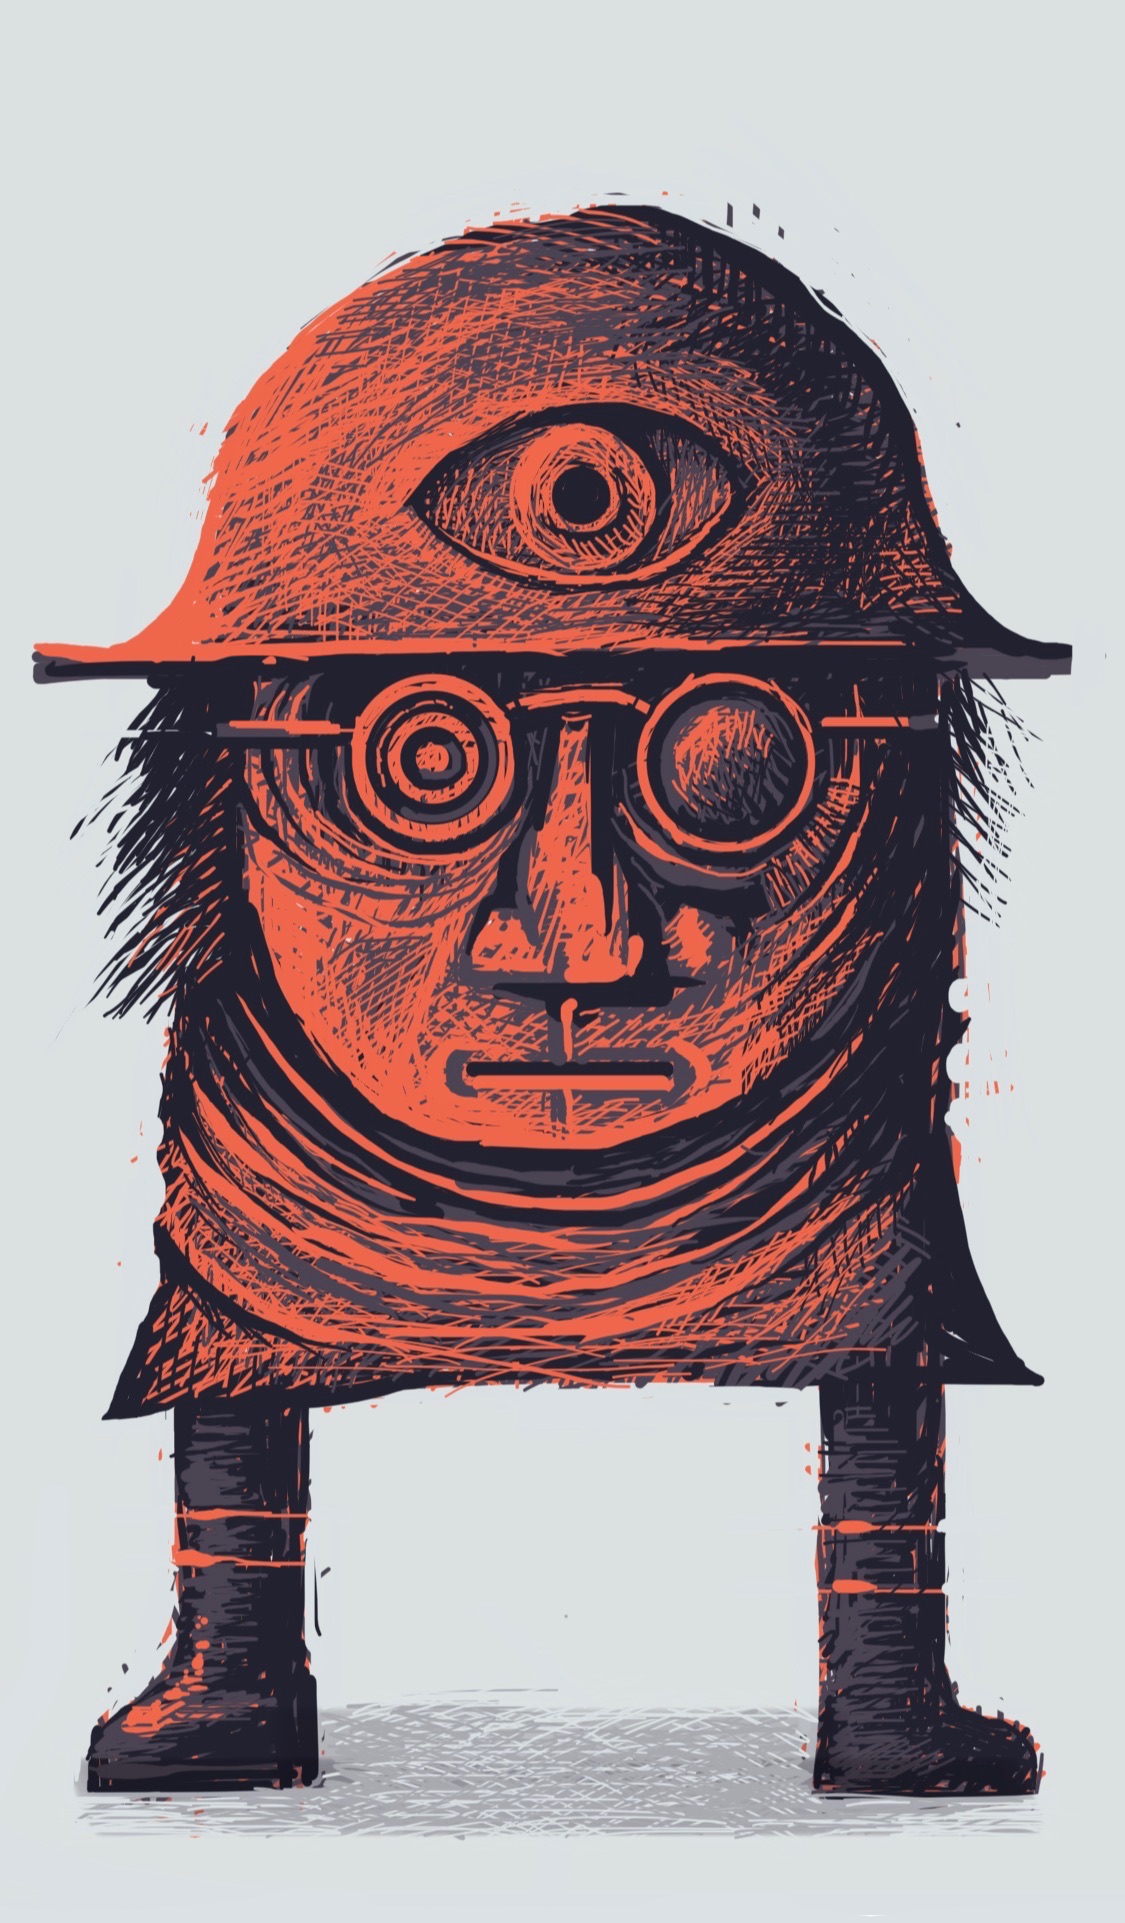 A person with glasses and a helmet on which is a single eye.